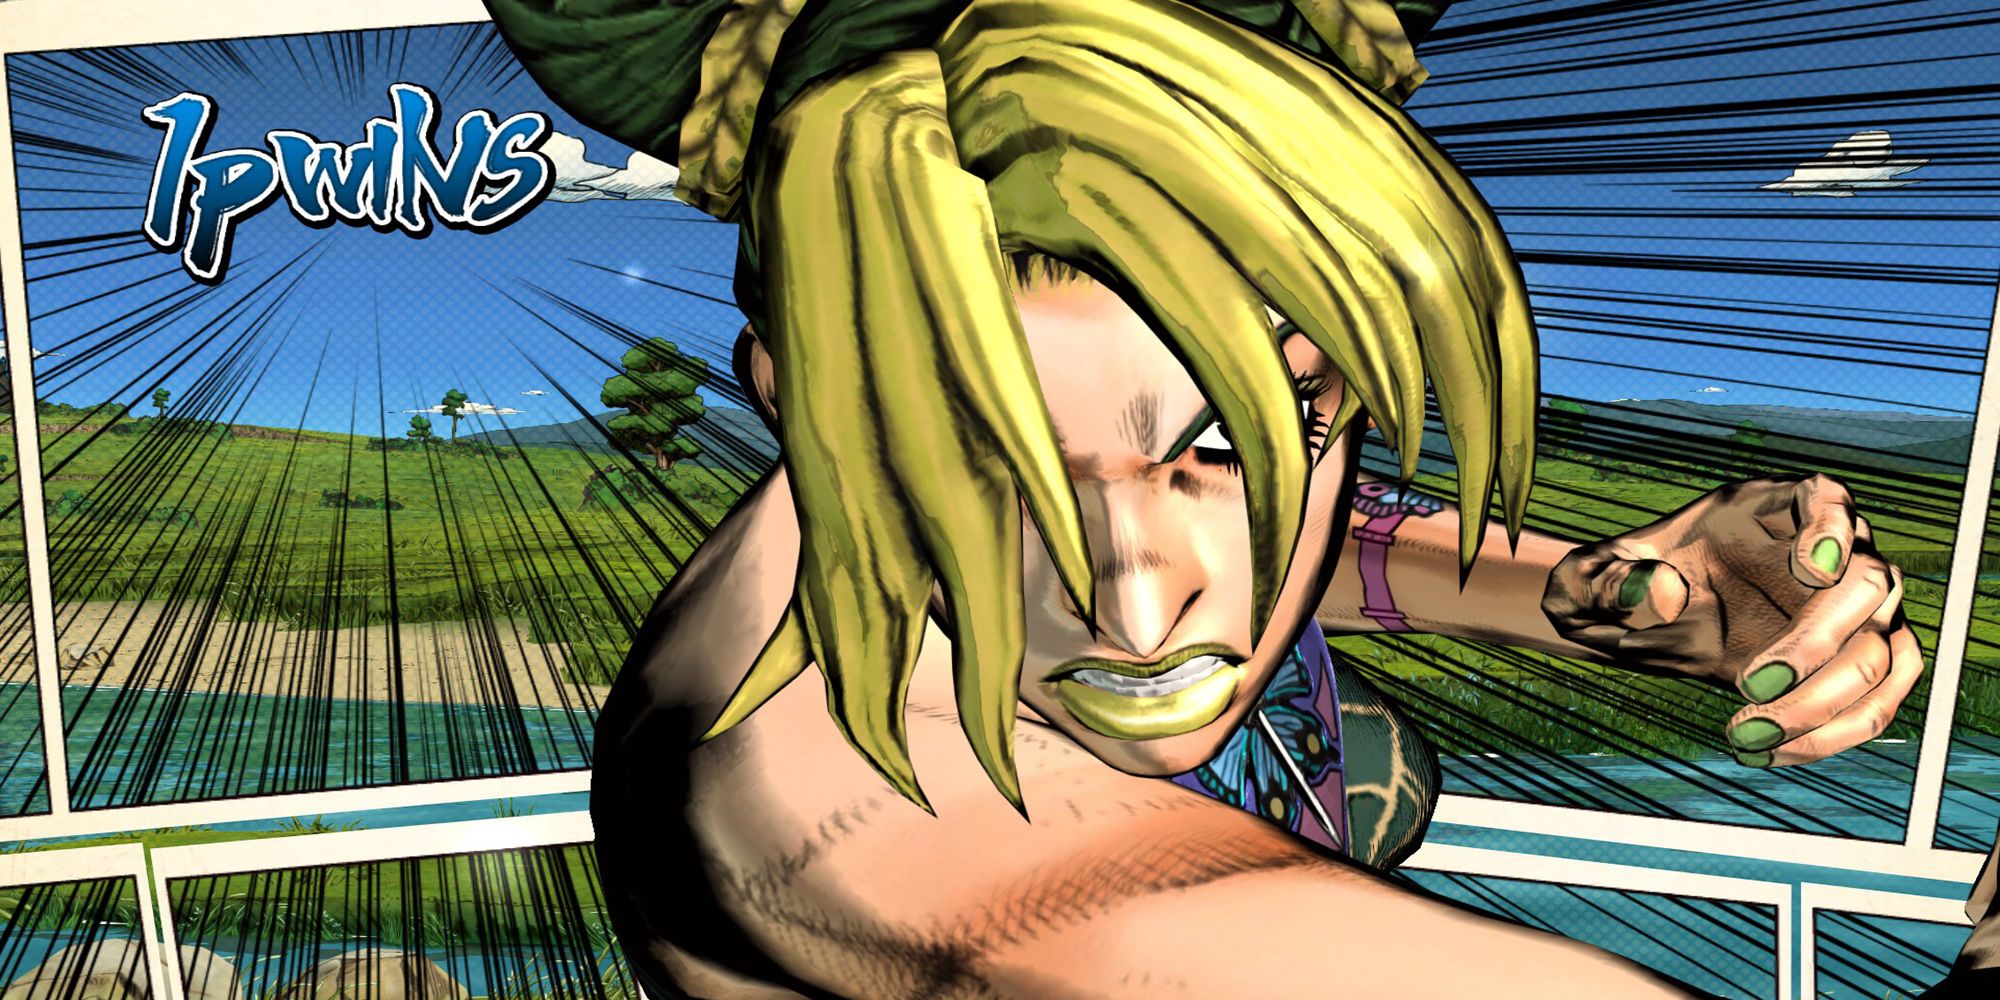 Jolyne Cujoh punches through the pages of a manga in this victory shot from JoJo's Bizarre Adventure: ASBR.